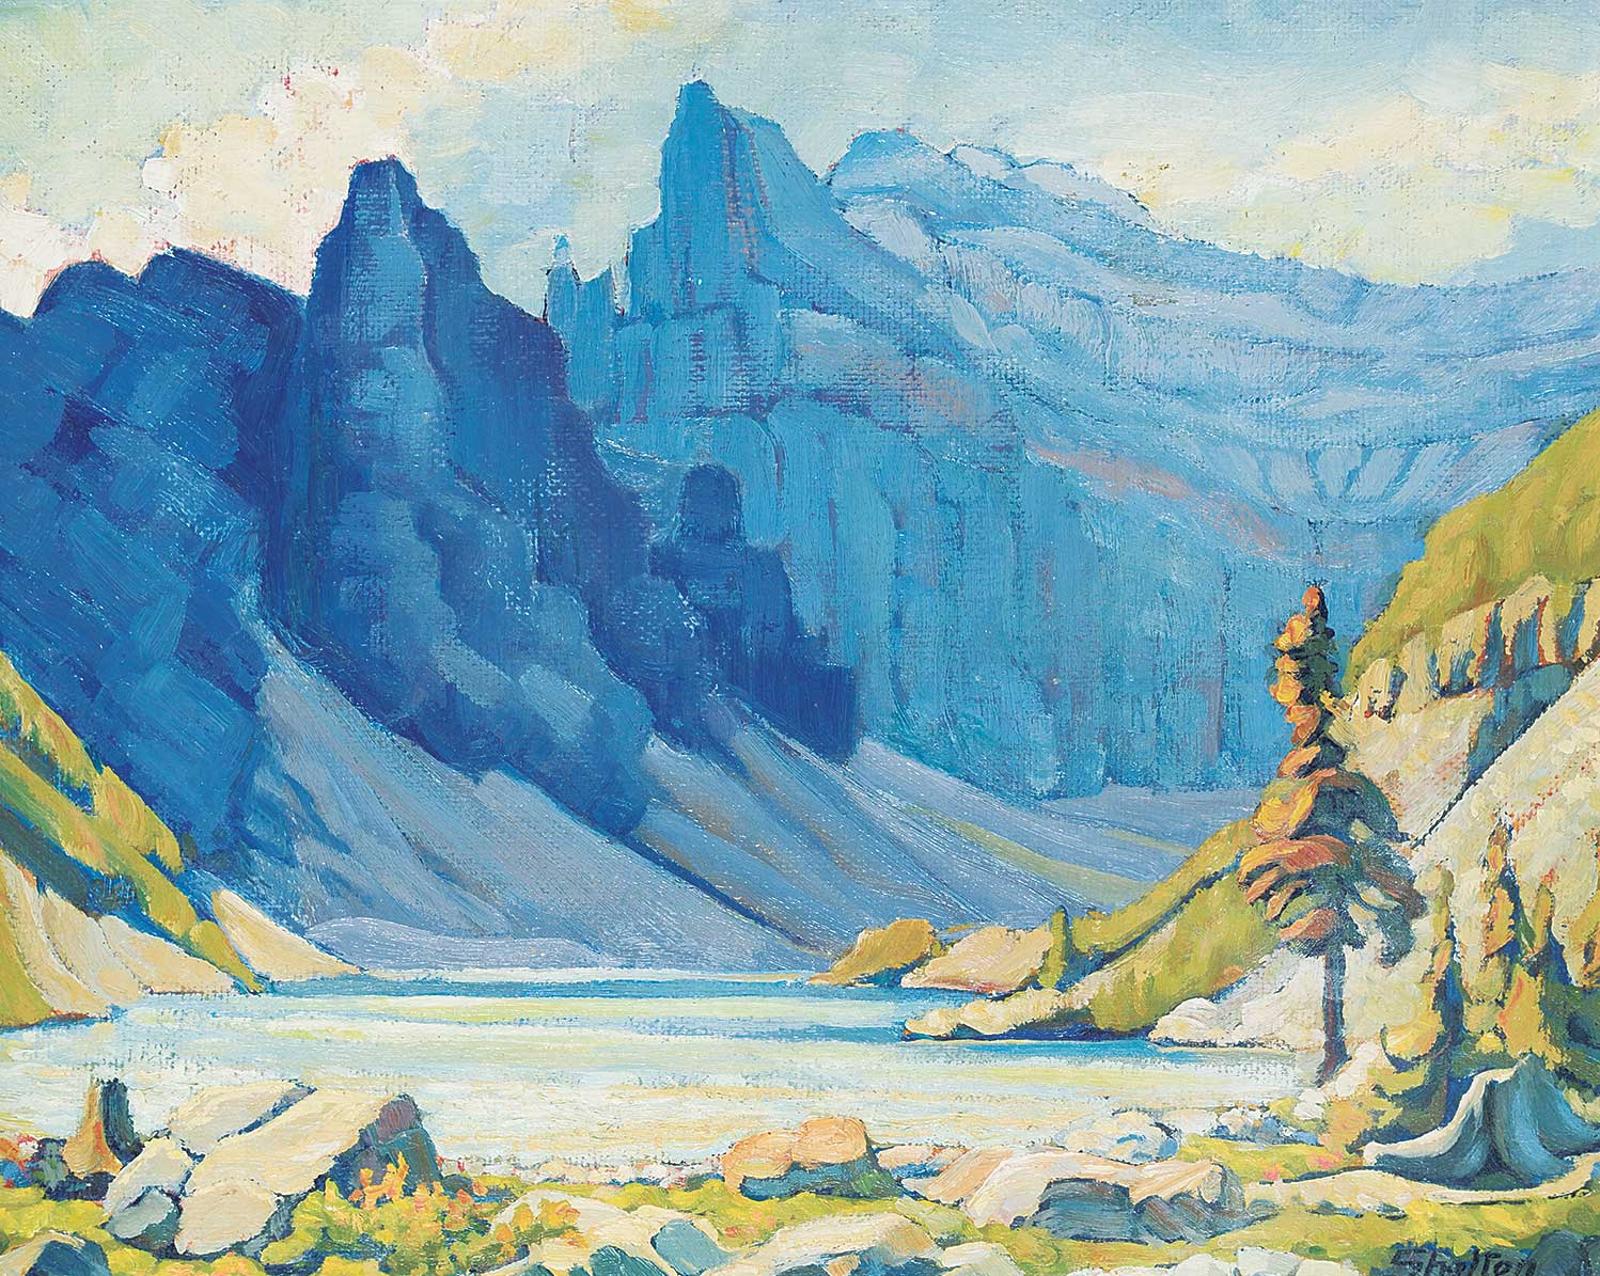 Margaret Dorothy Shelton (1915-1984) - Untitled - High in the Rockies